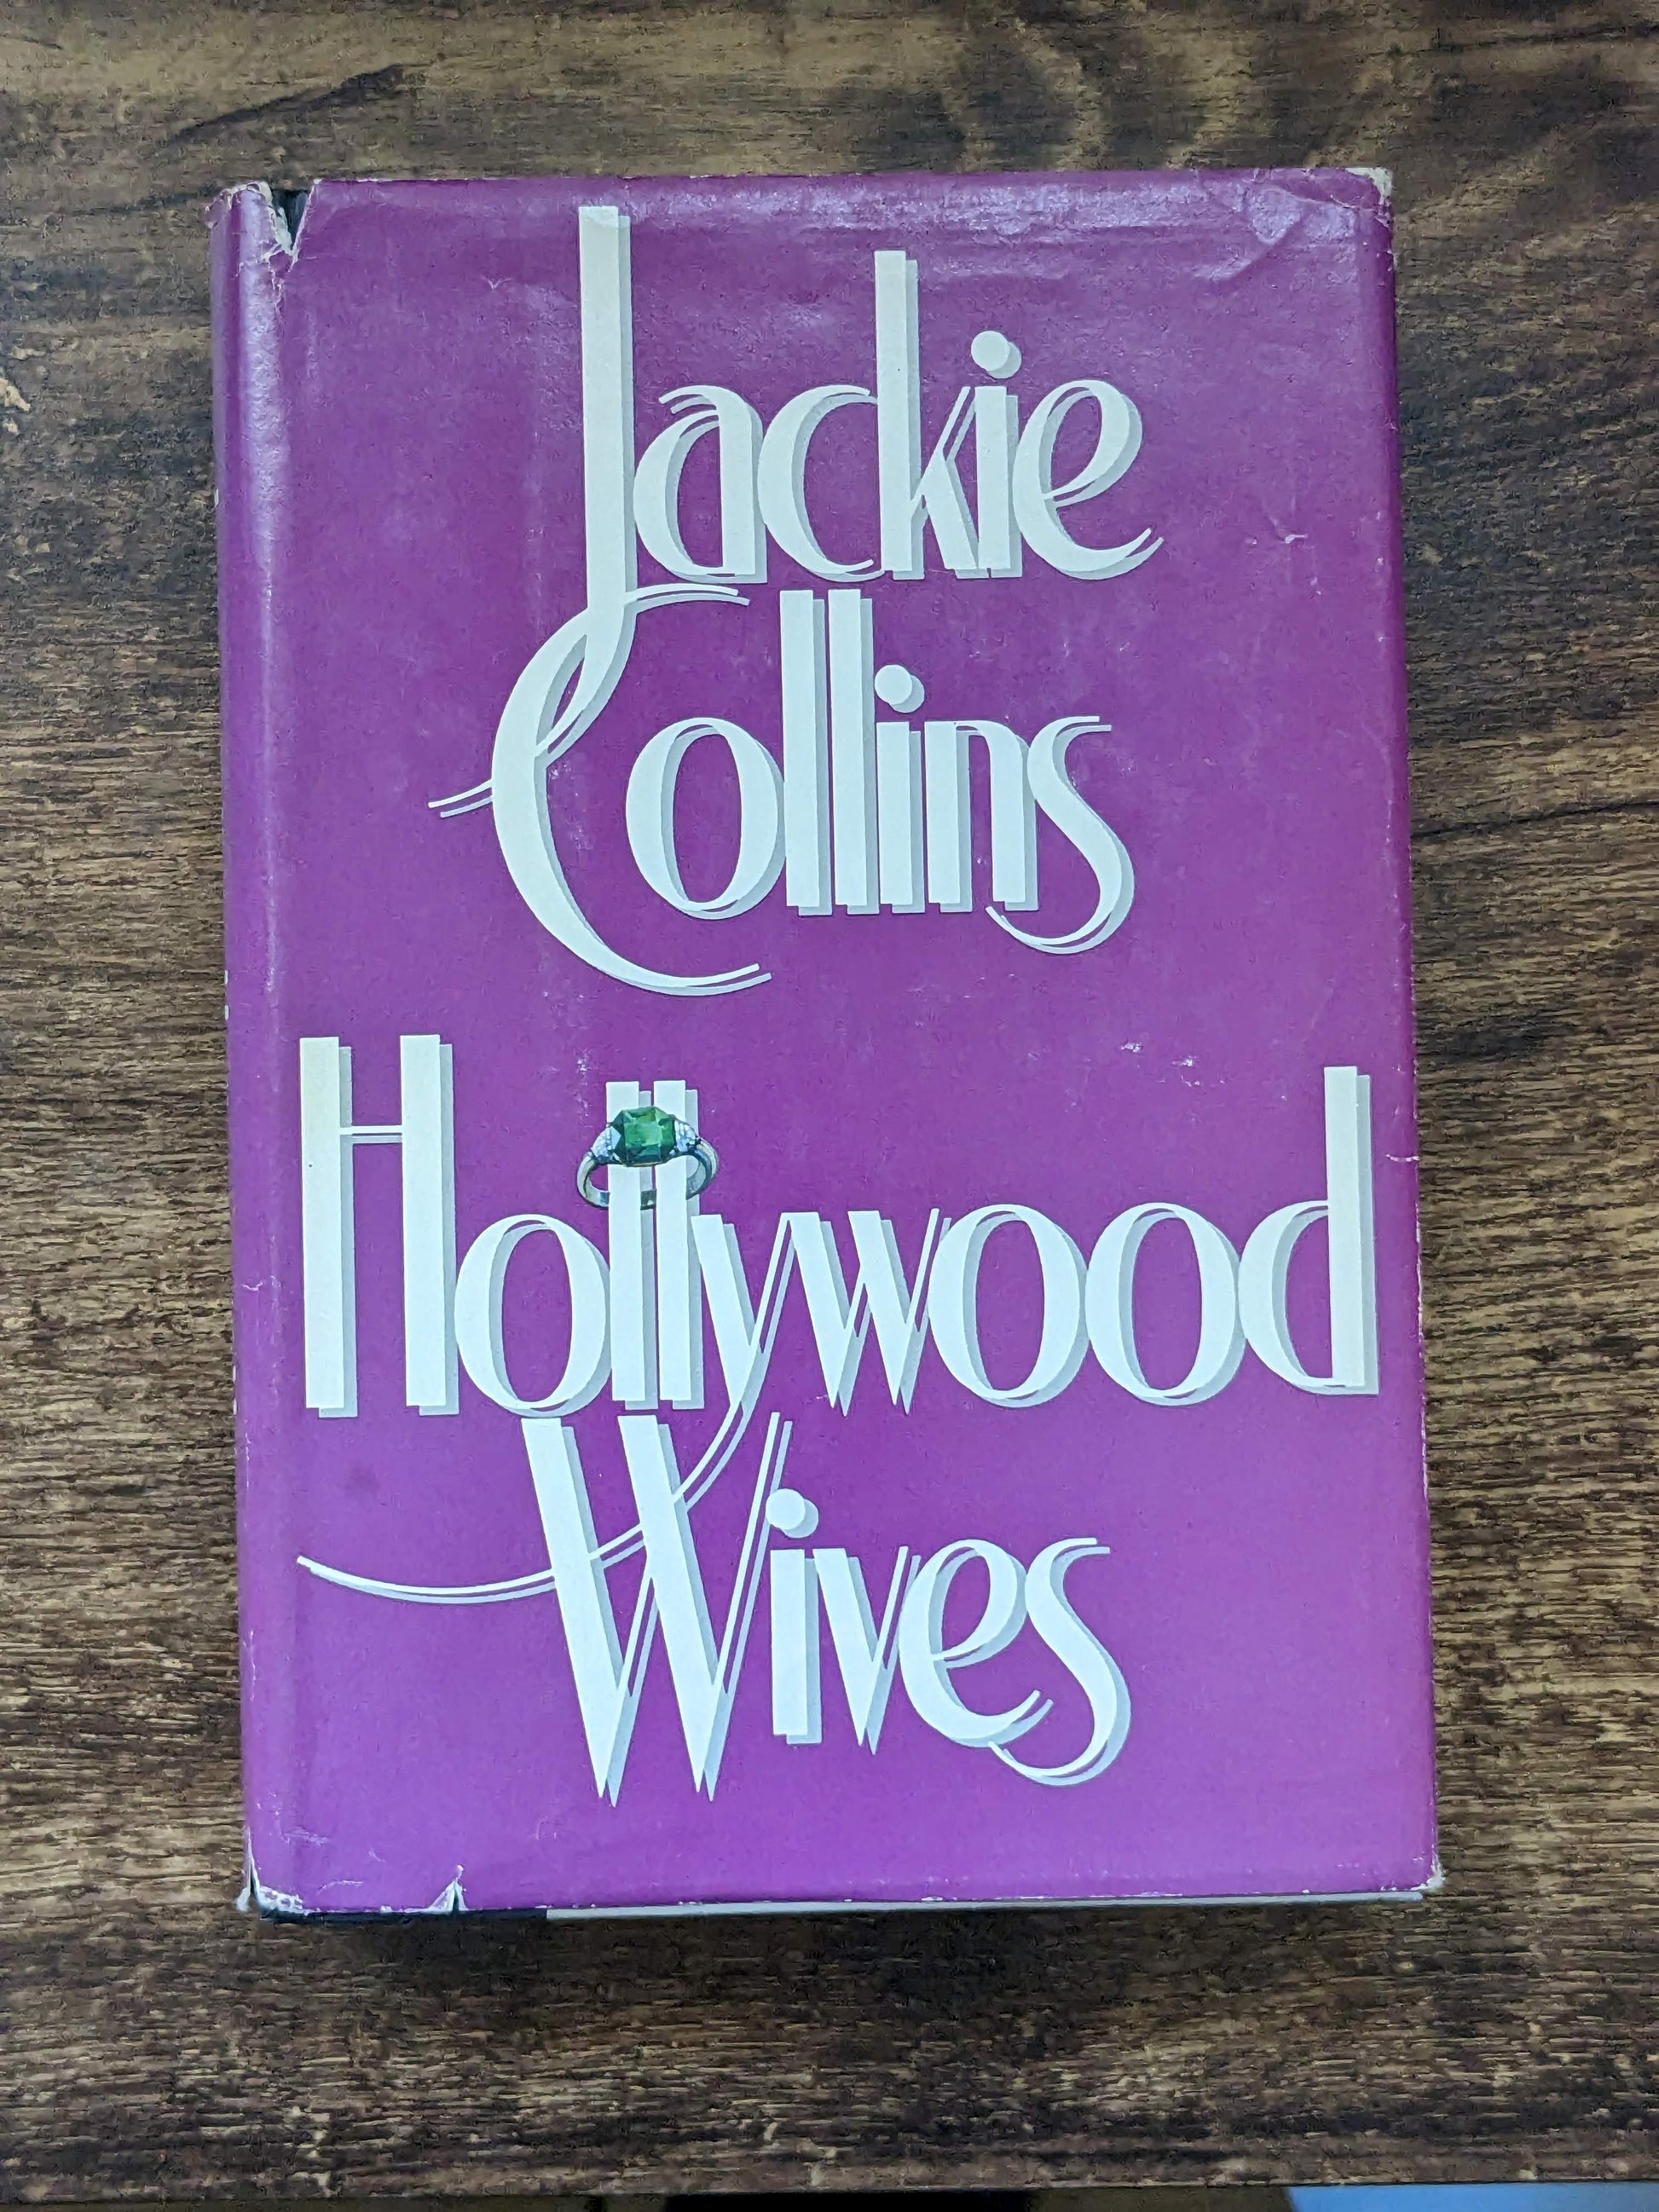 HOLLYWOOD WIVES by Jackie Collins (Vintage Hardcover) - Asylum Books